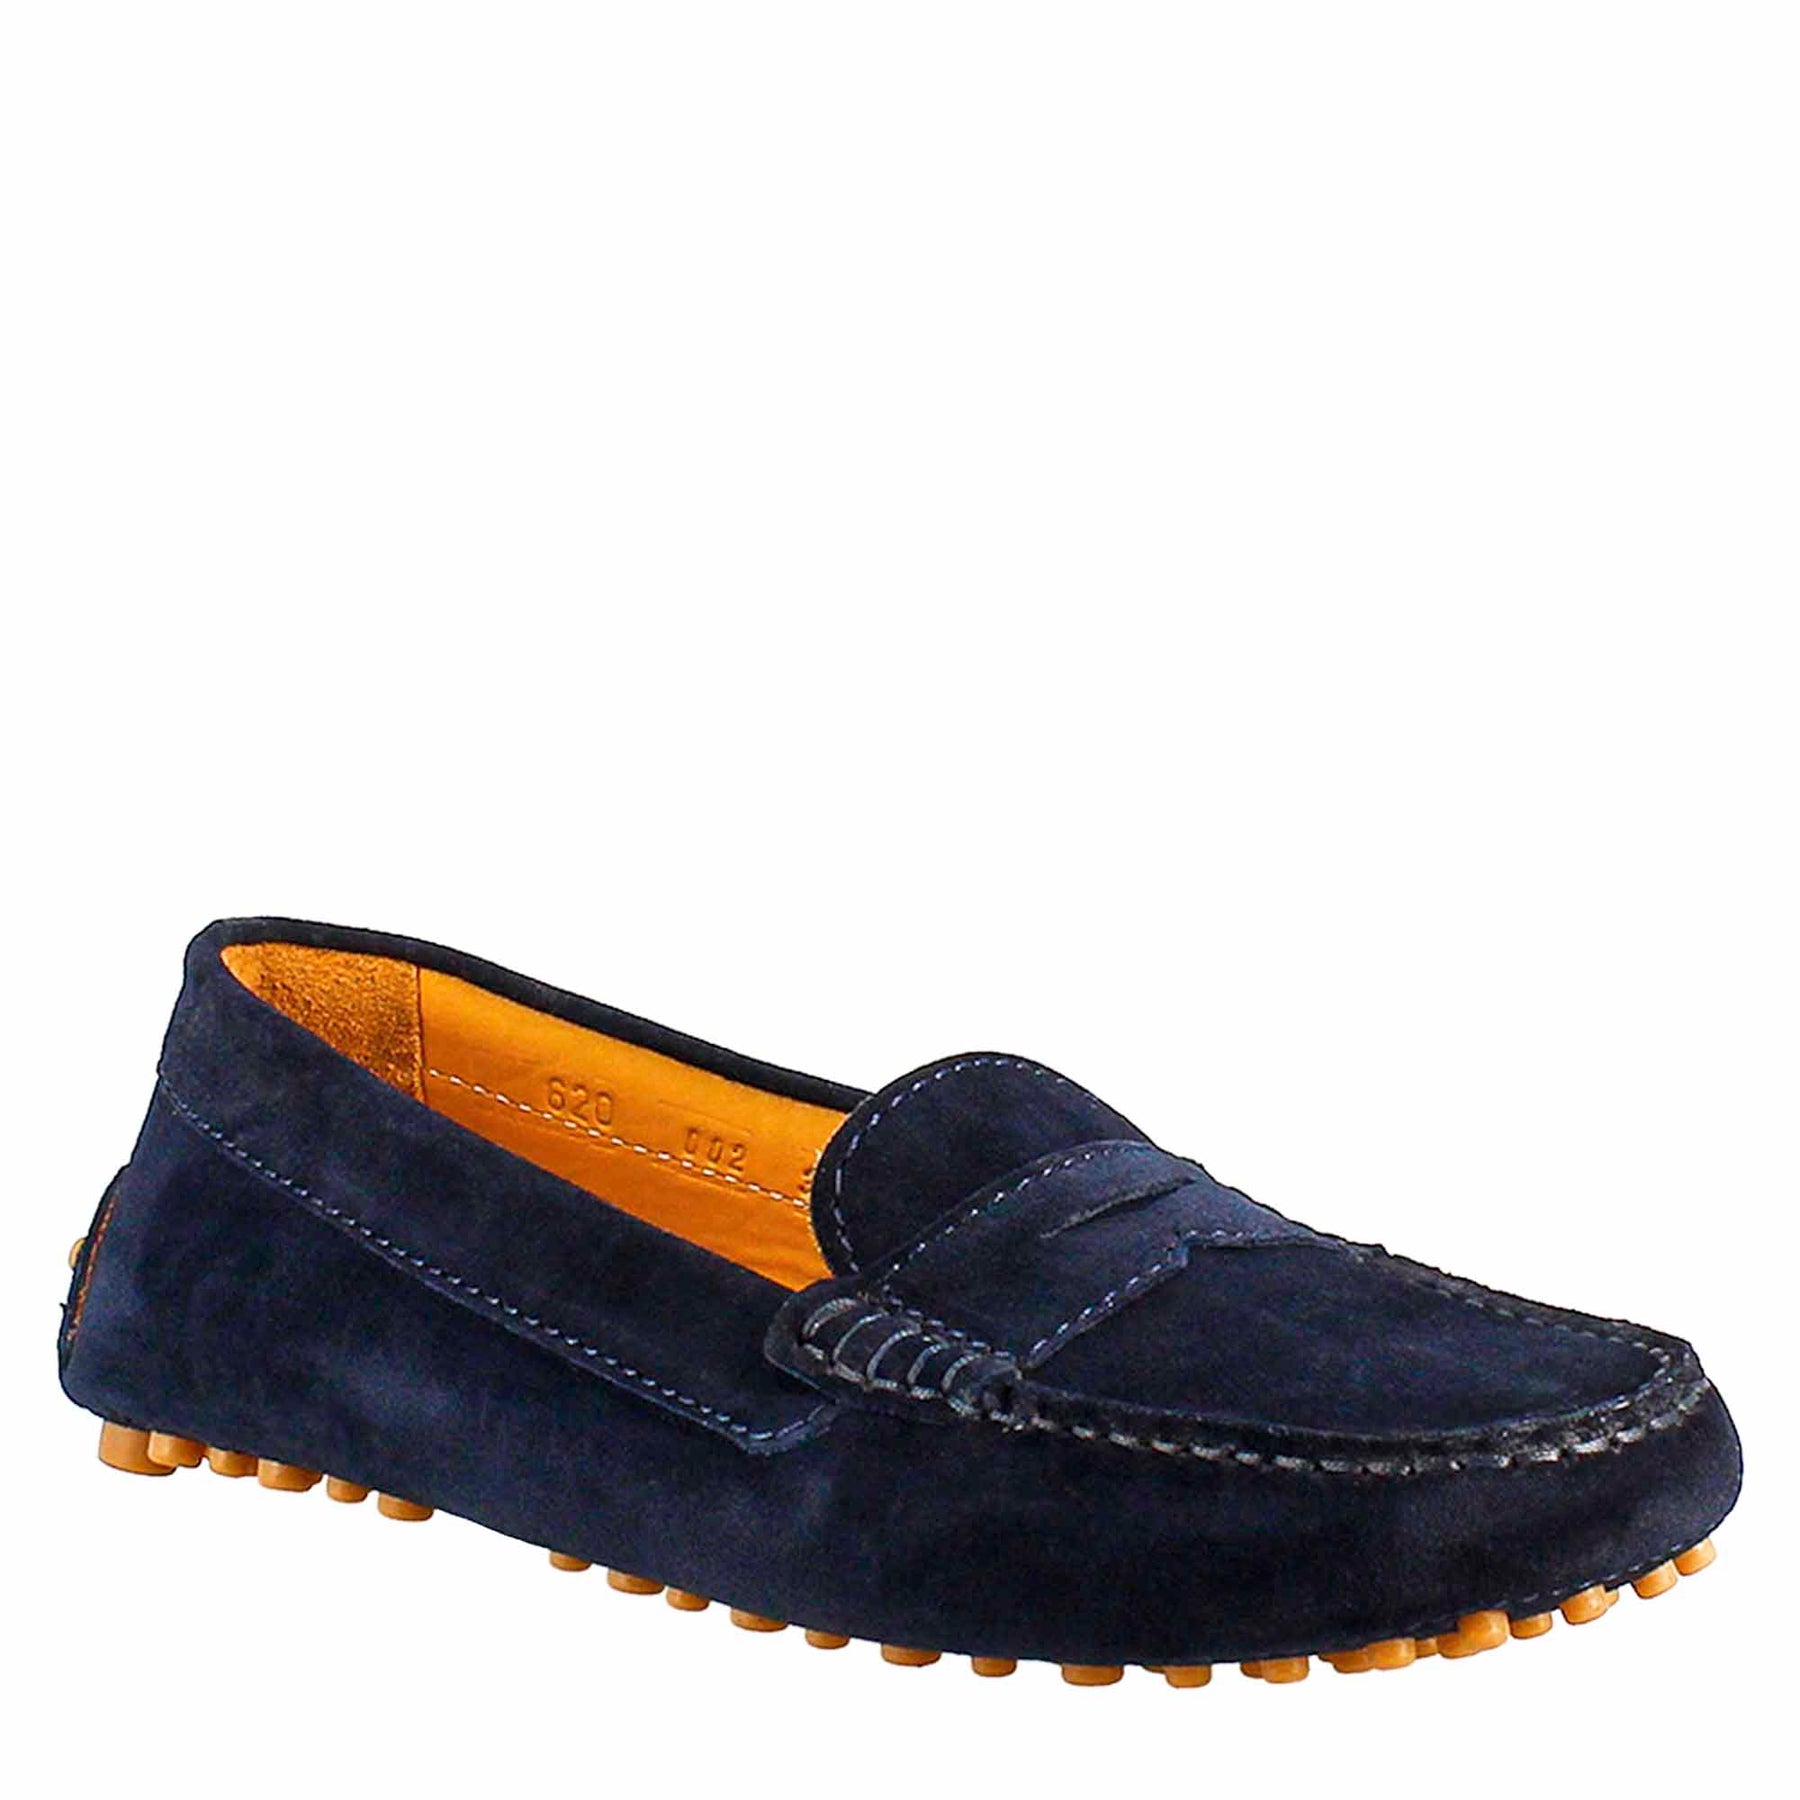 Tubular women's moccasin in blue leather